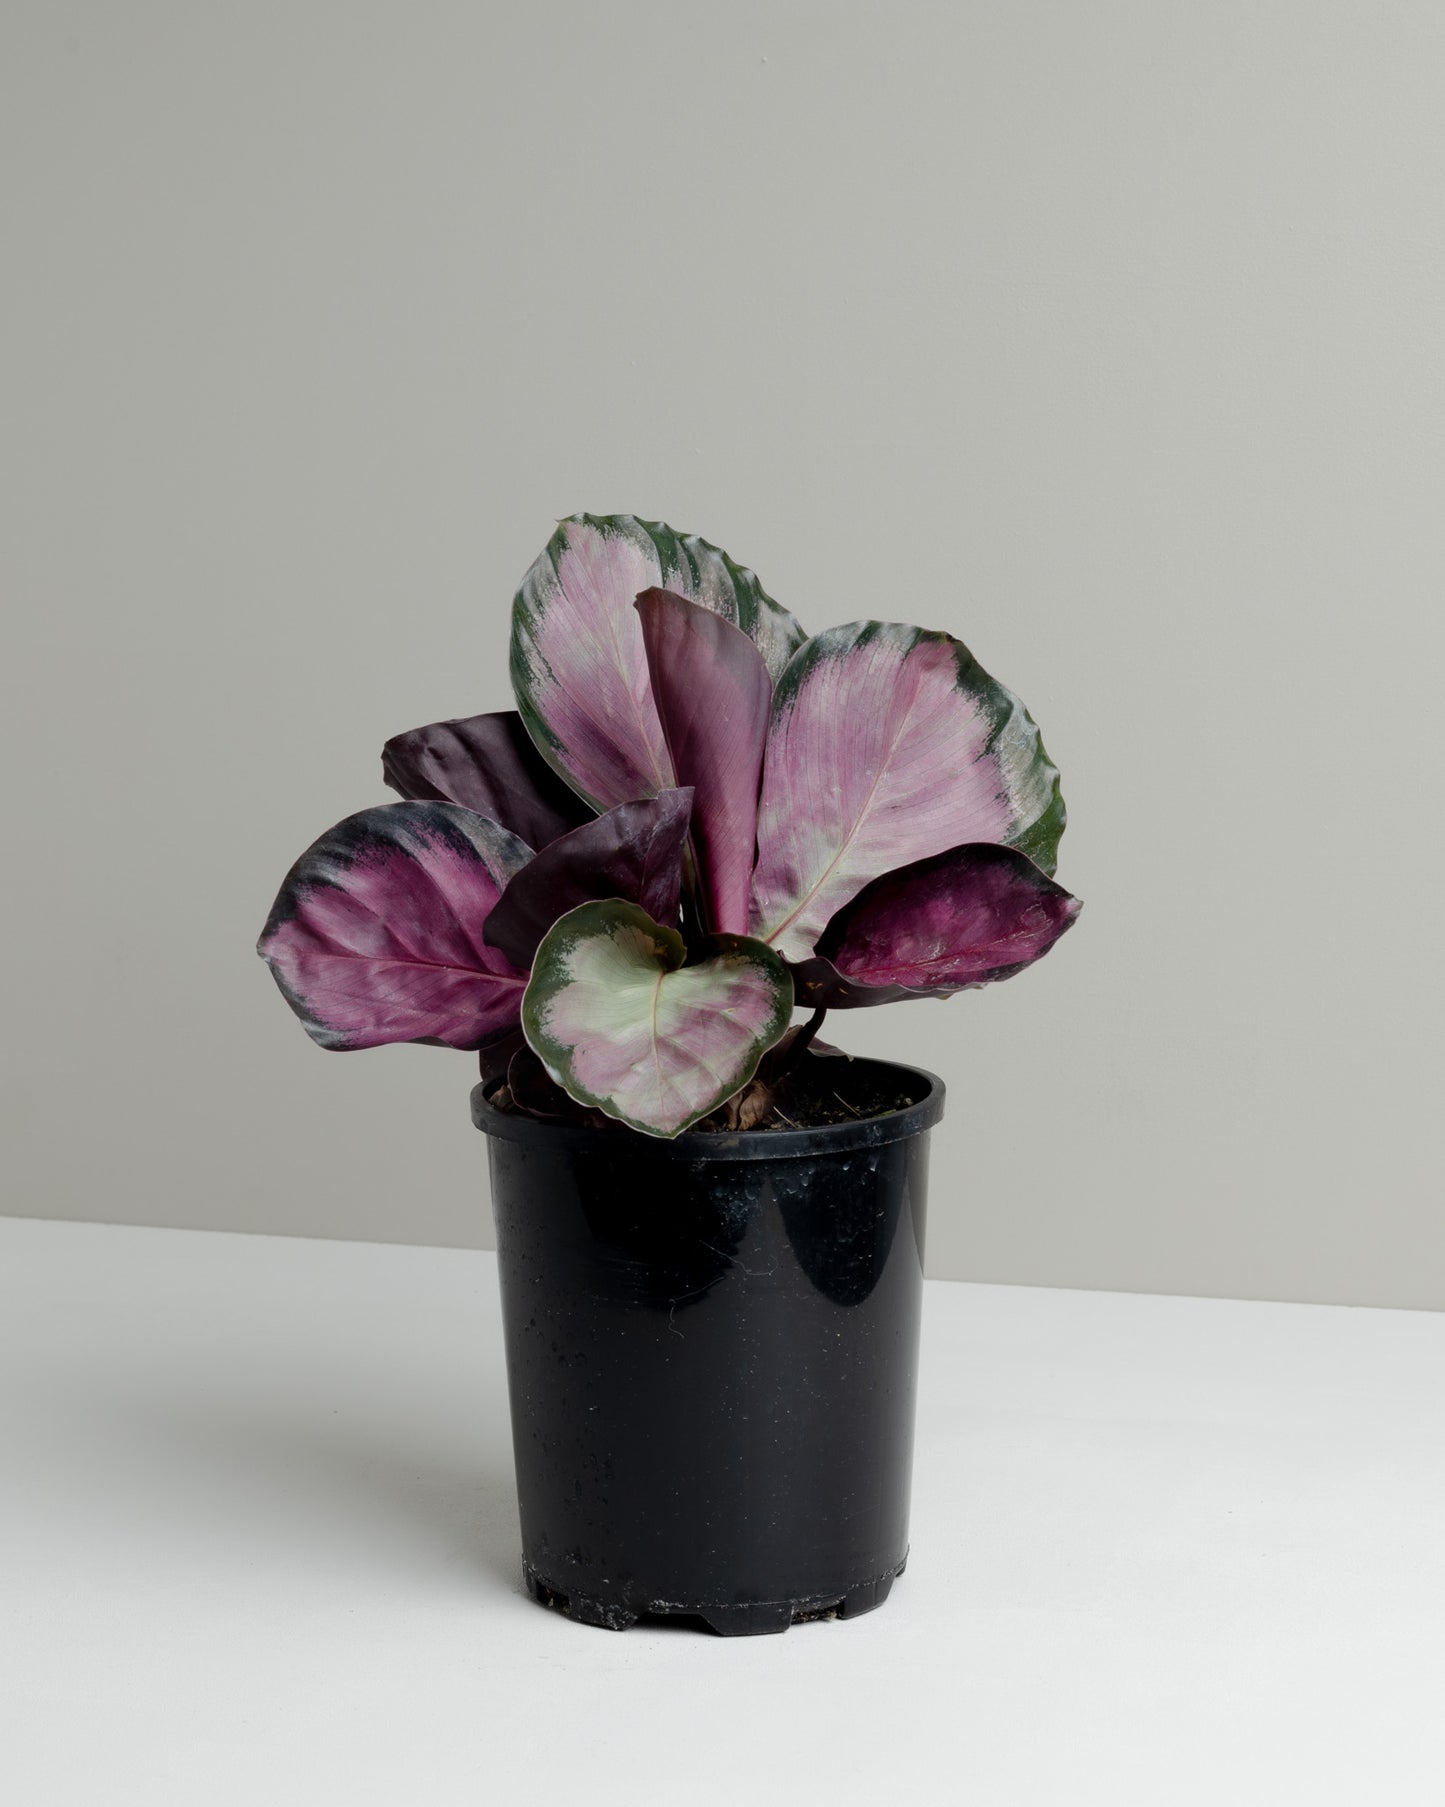 Calathea Roseopicta 'Rosy' plant. Buy indoor plants online and have it delivered to your door.